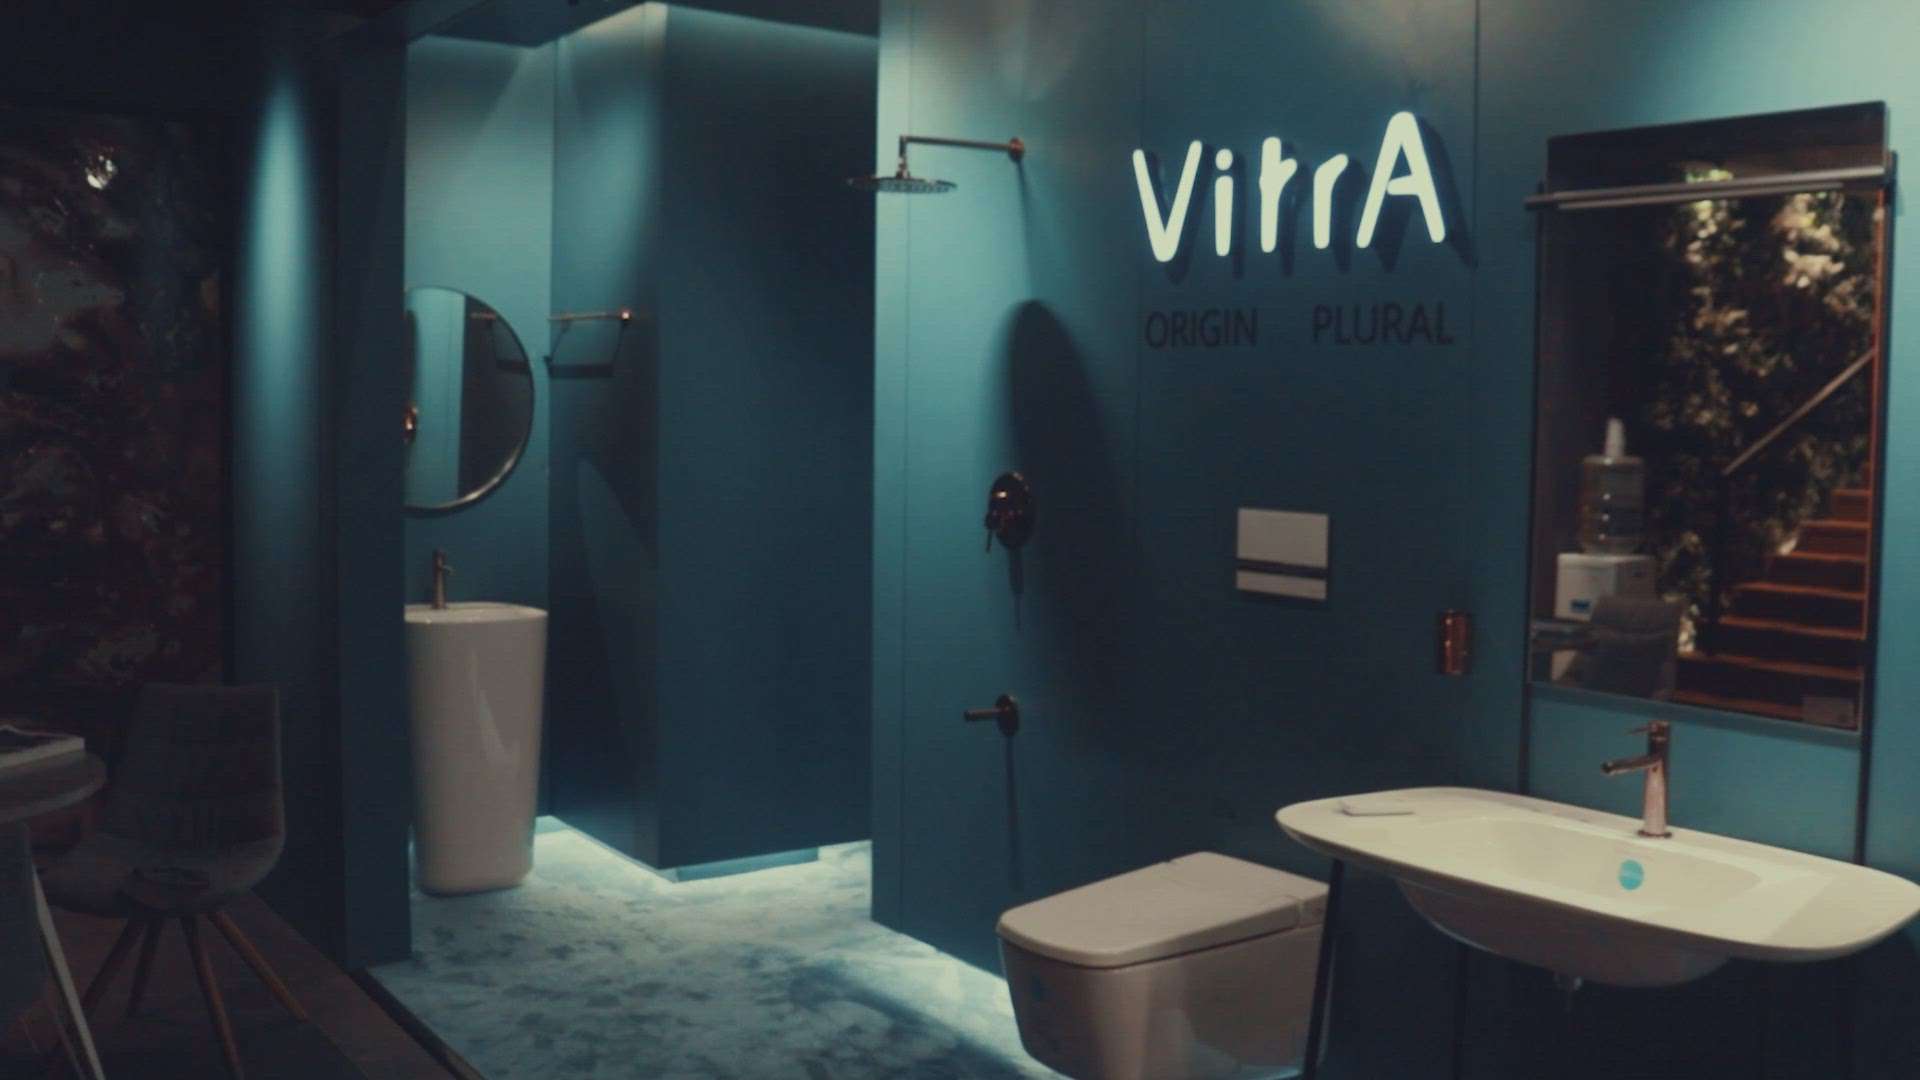 Reimage your modern bathrooms with architectural masterpieces, minimalistic designs, and alluring shapes by Vitra.

 #BathroomIdeas  #bathroomdesign #bathroom  #bathroominspo  #BathroomFittings #bathroominspiration